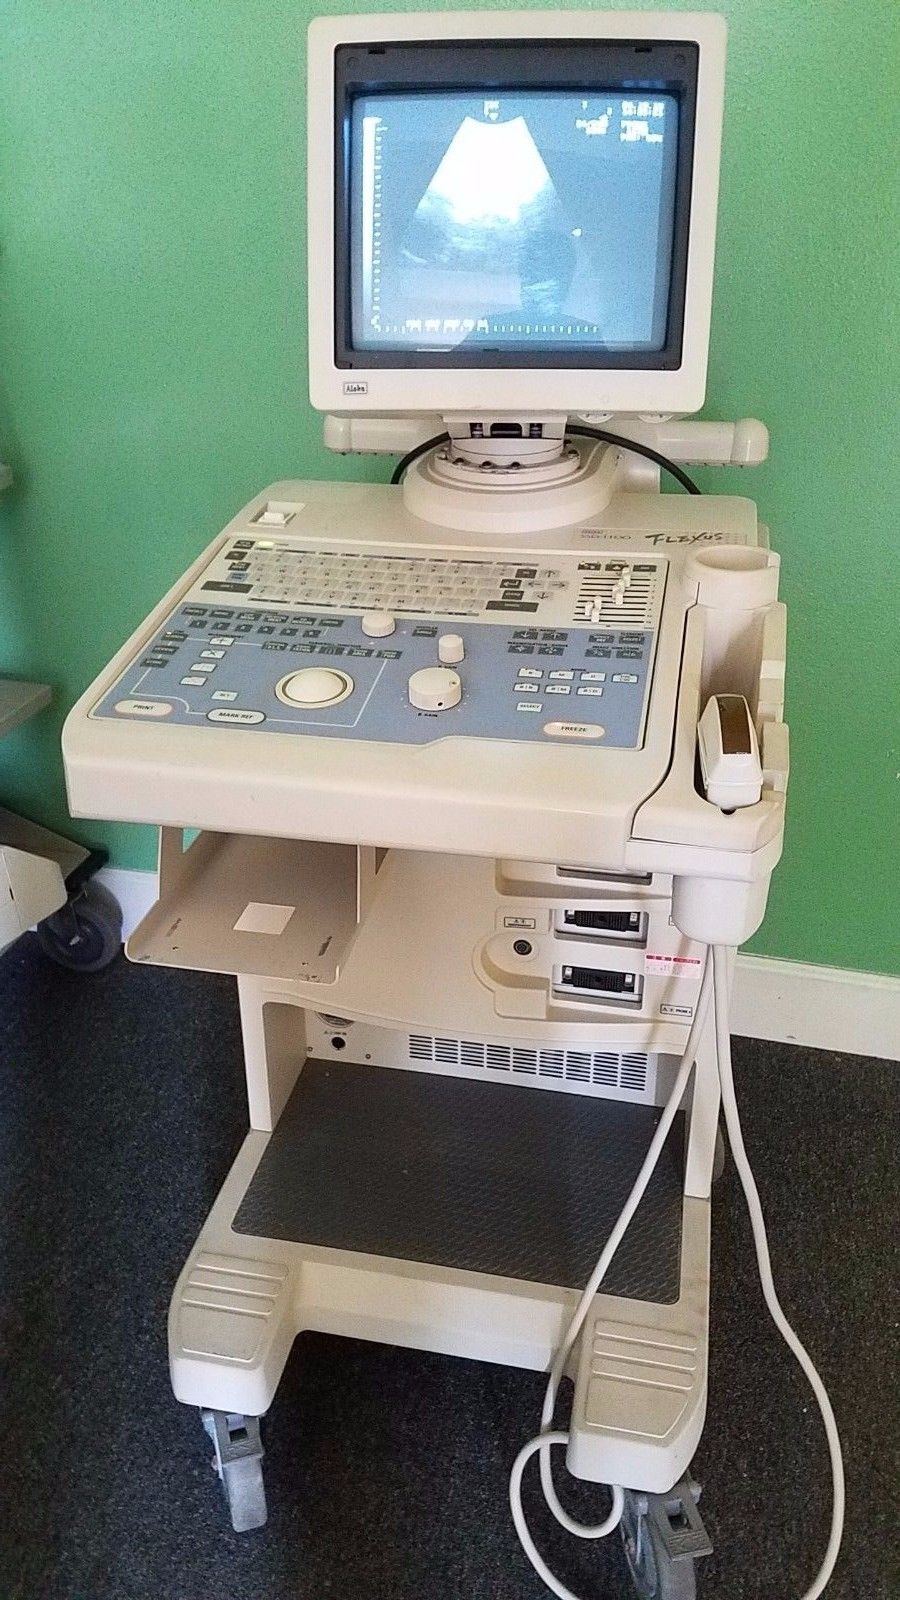 Aloka SSD-1100 Flexus Ultrasound With UST-934N 3.5 Probe DIAGNOSTIC ULTRASOUND MACHINES FOR SALE